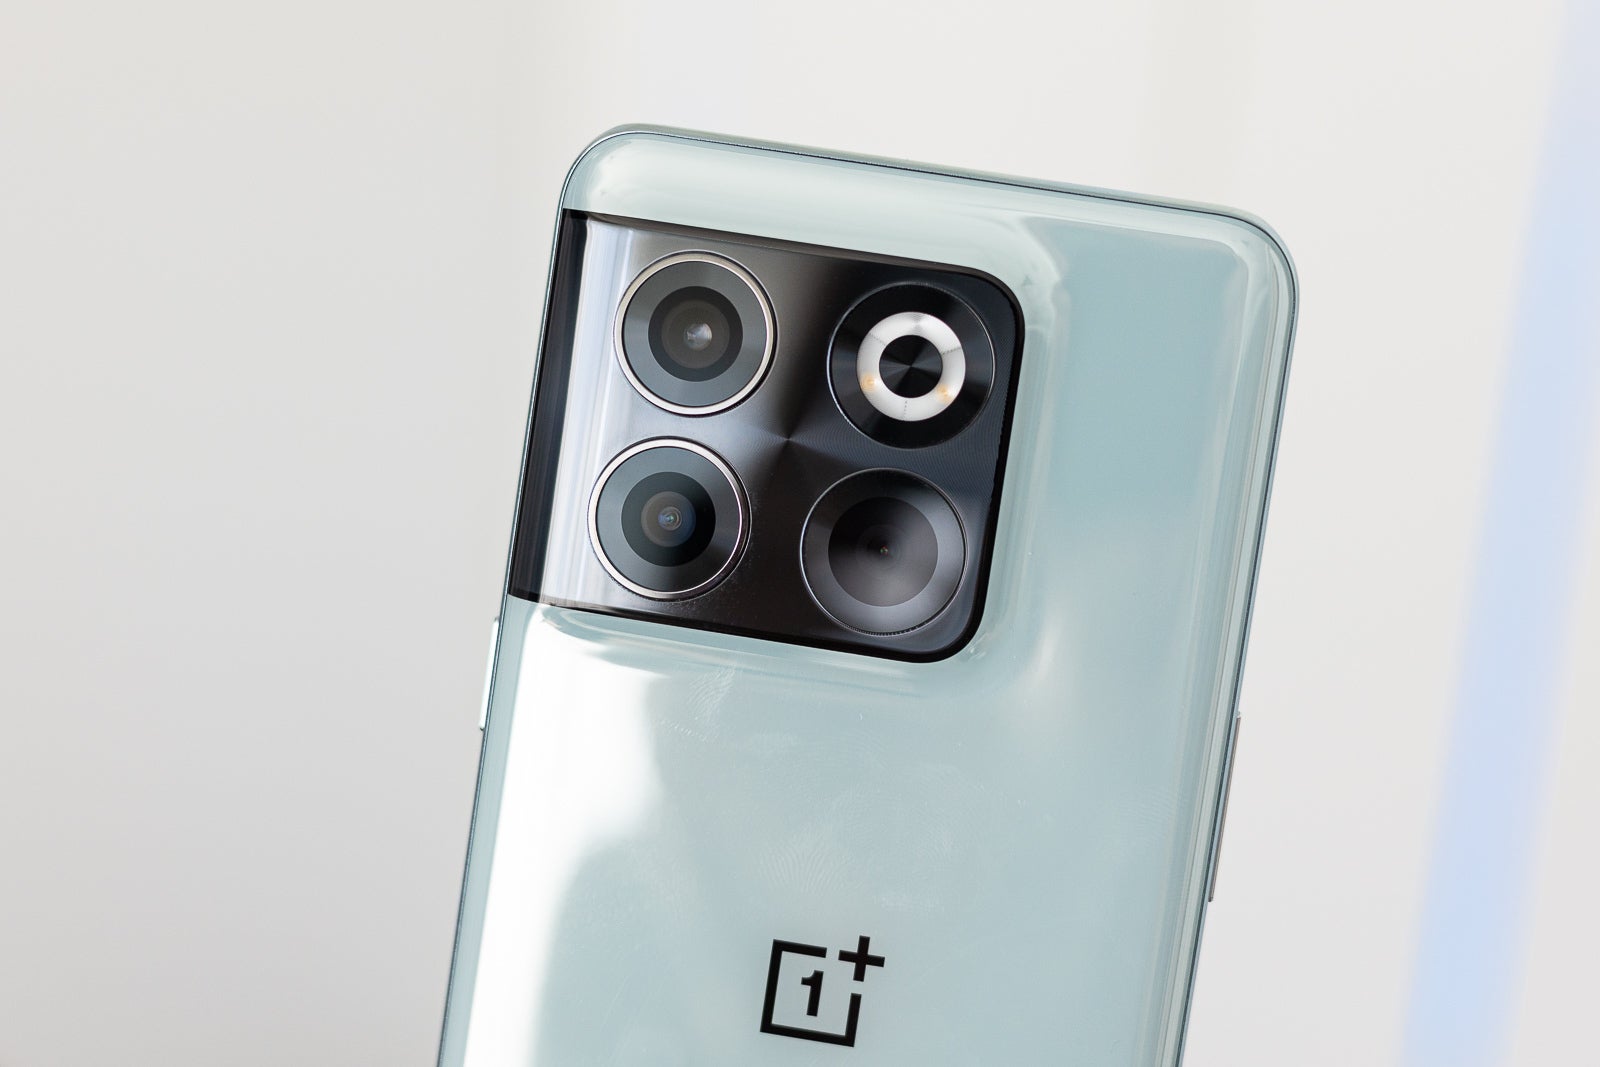 (Image credit - PhoneArena) The imposing look of the camera system can be deceiving - OnePlus 10T Review: this charger comes with a phone!